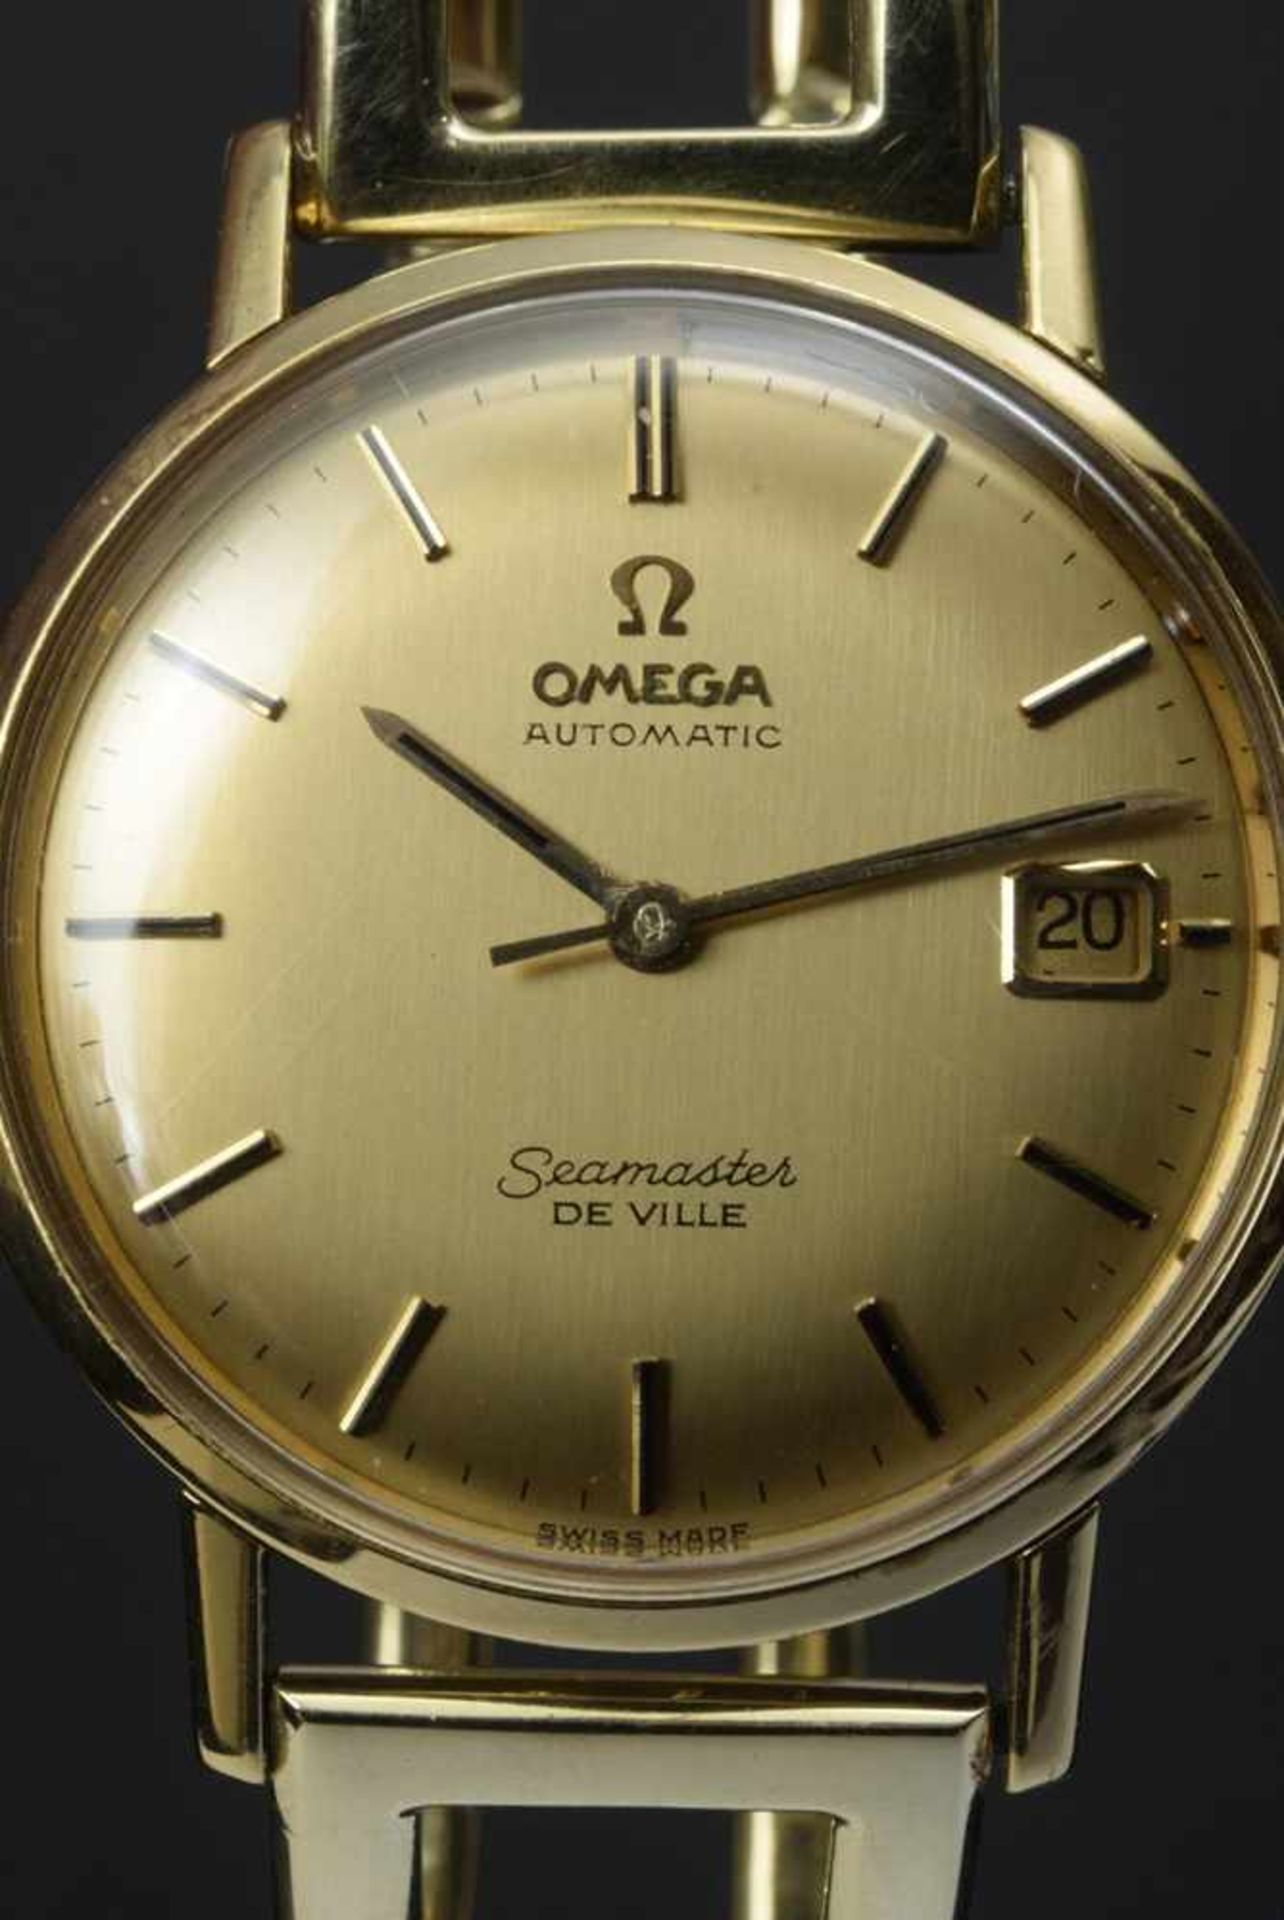 GG 750 Omega "Seamaster De Ville" watch with openworked GG 585 strap, automatic movement, date, - Image 2 of 5